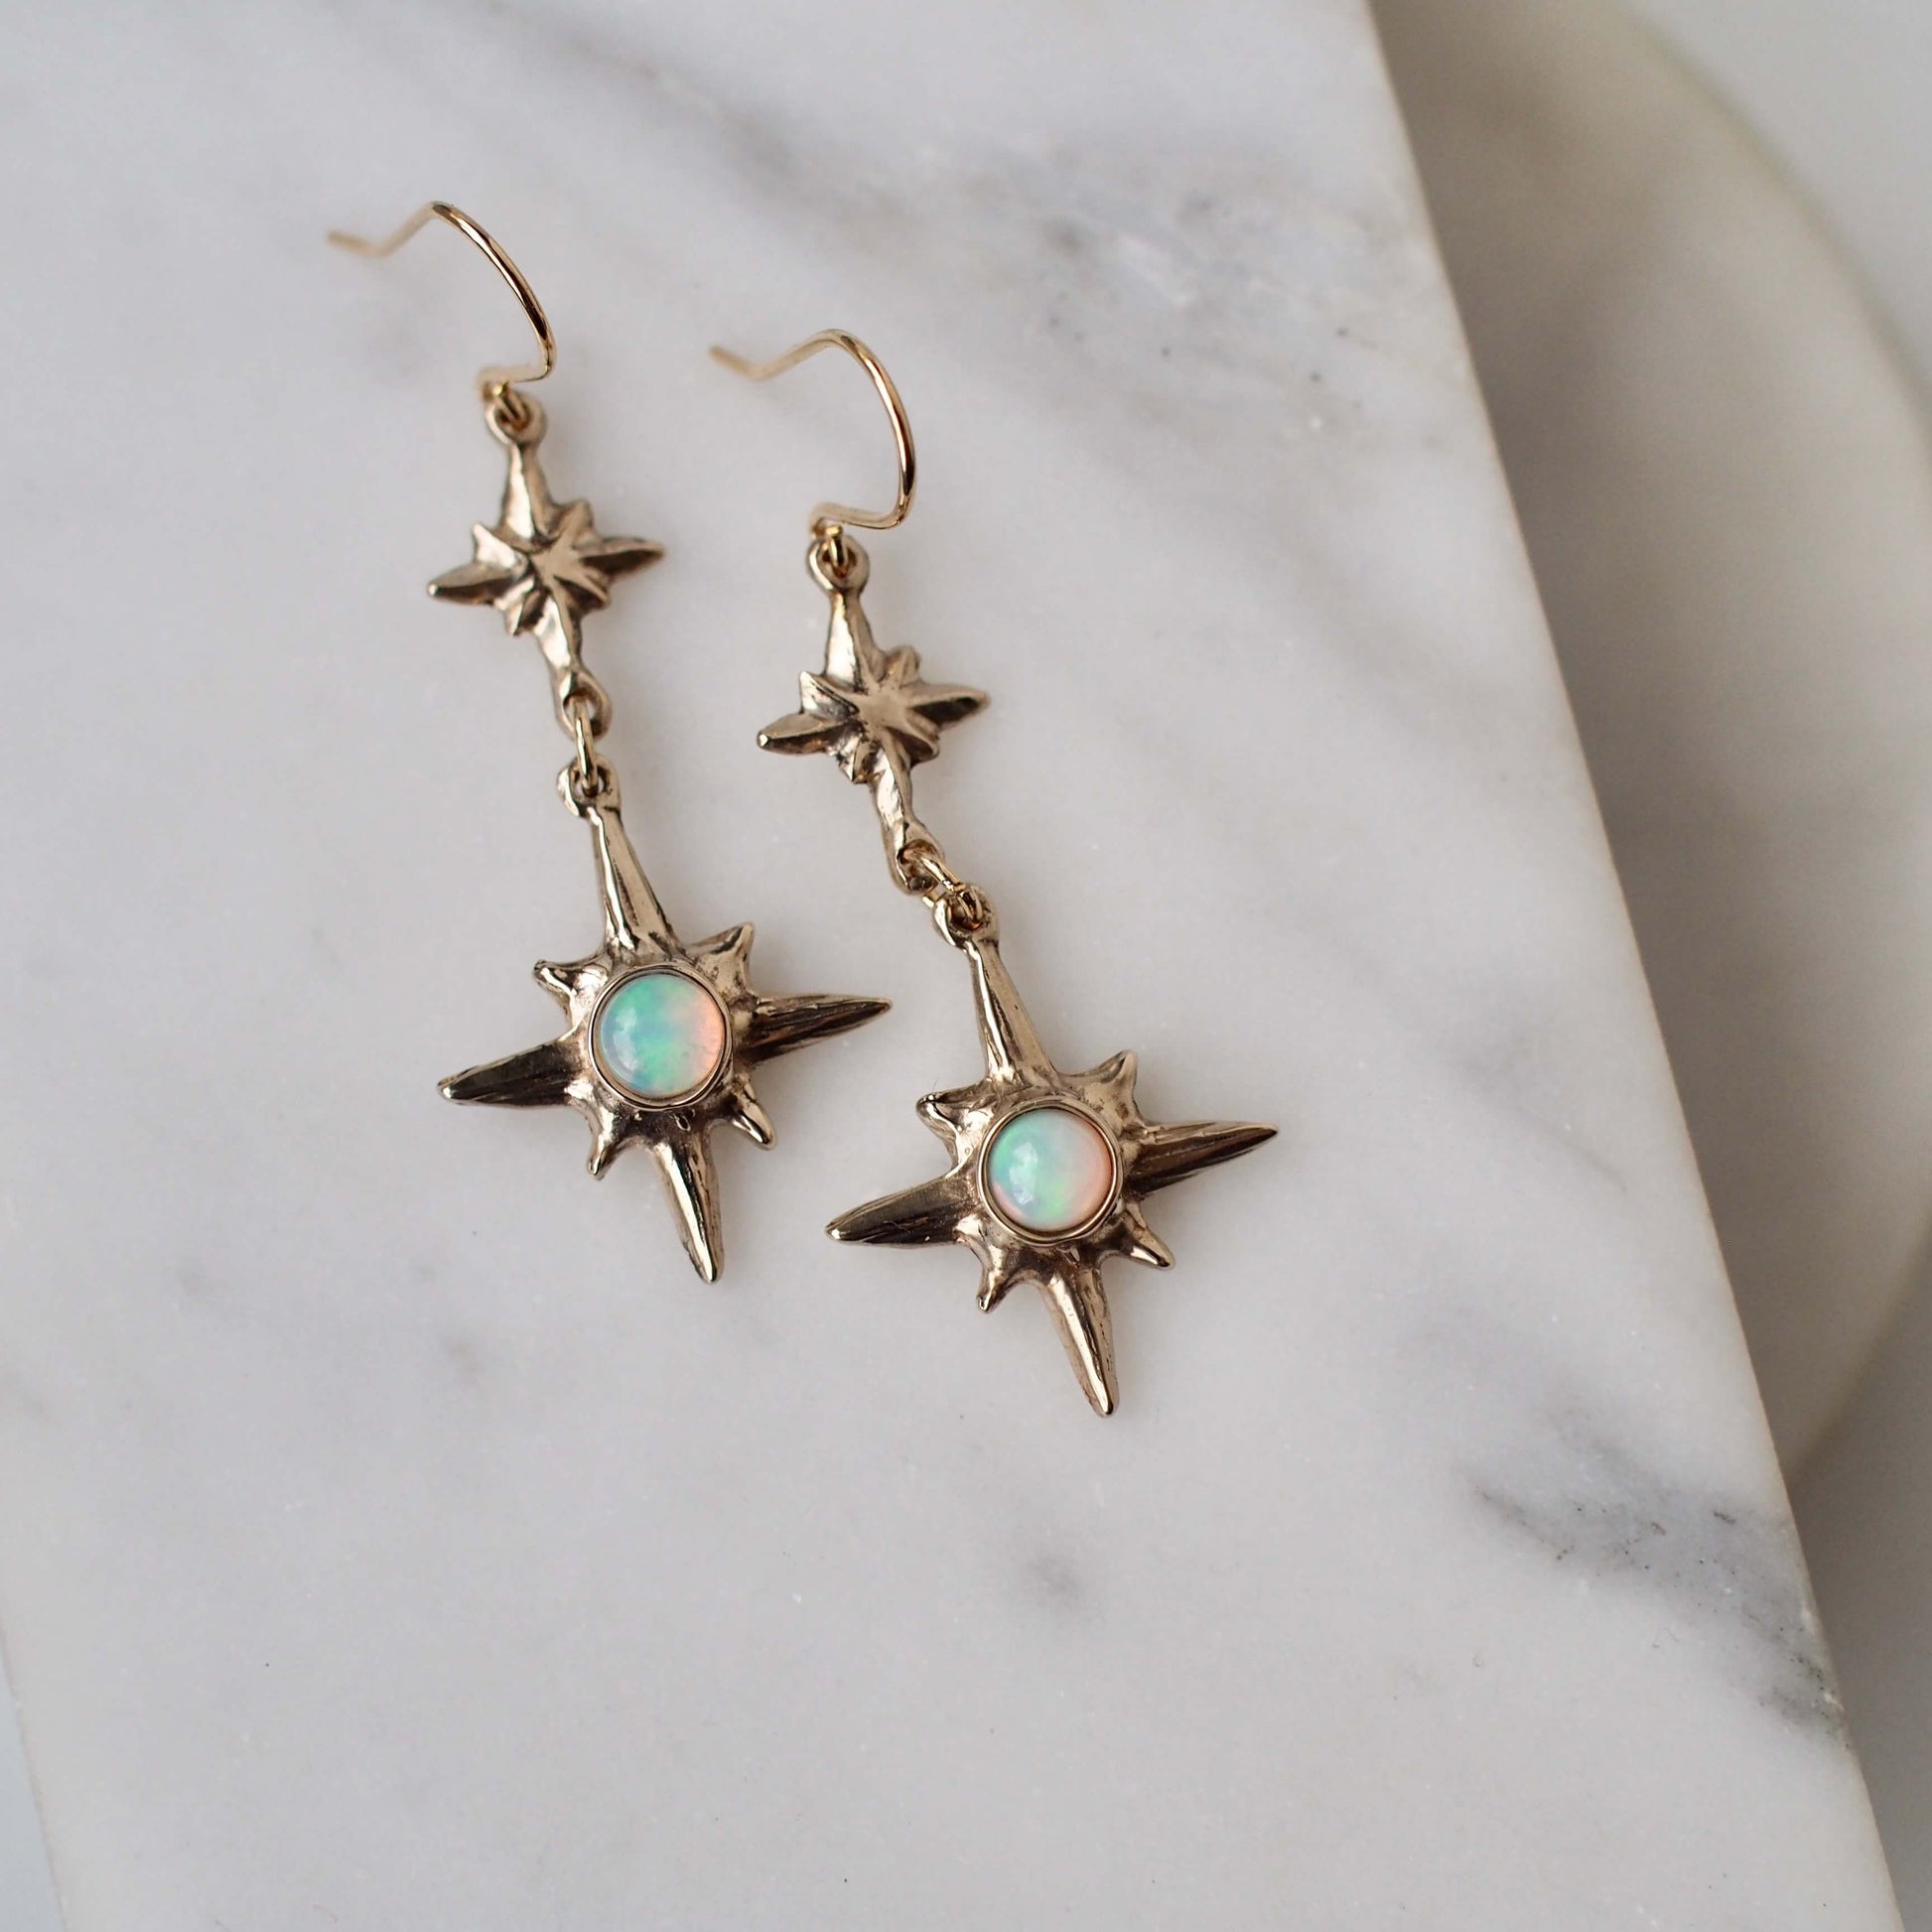 North Star Dangle earrings set with sustainably sourced natural opal, artisan made jewelry by Iron Oxide Designs.